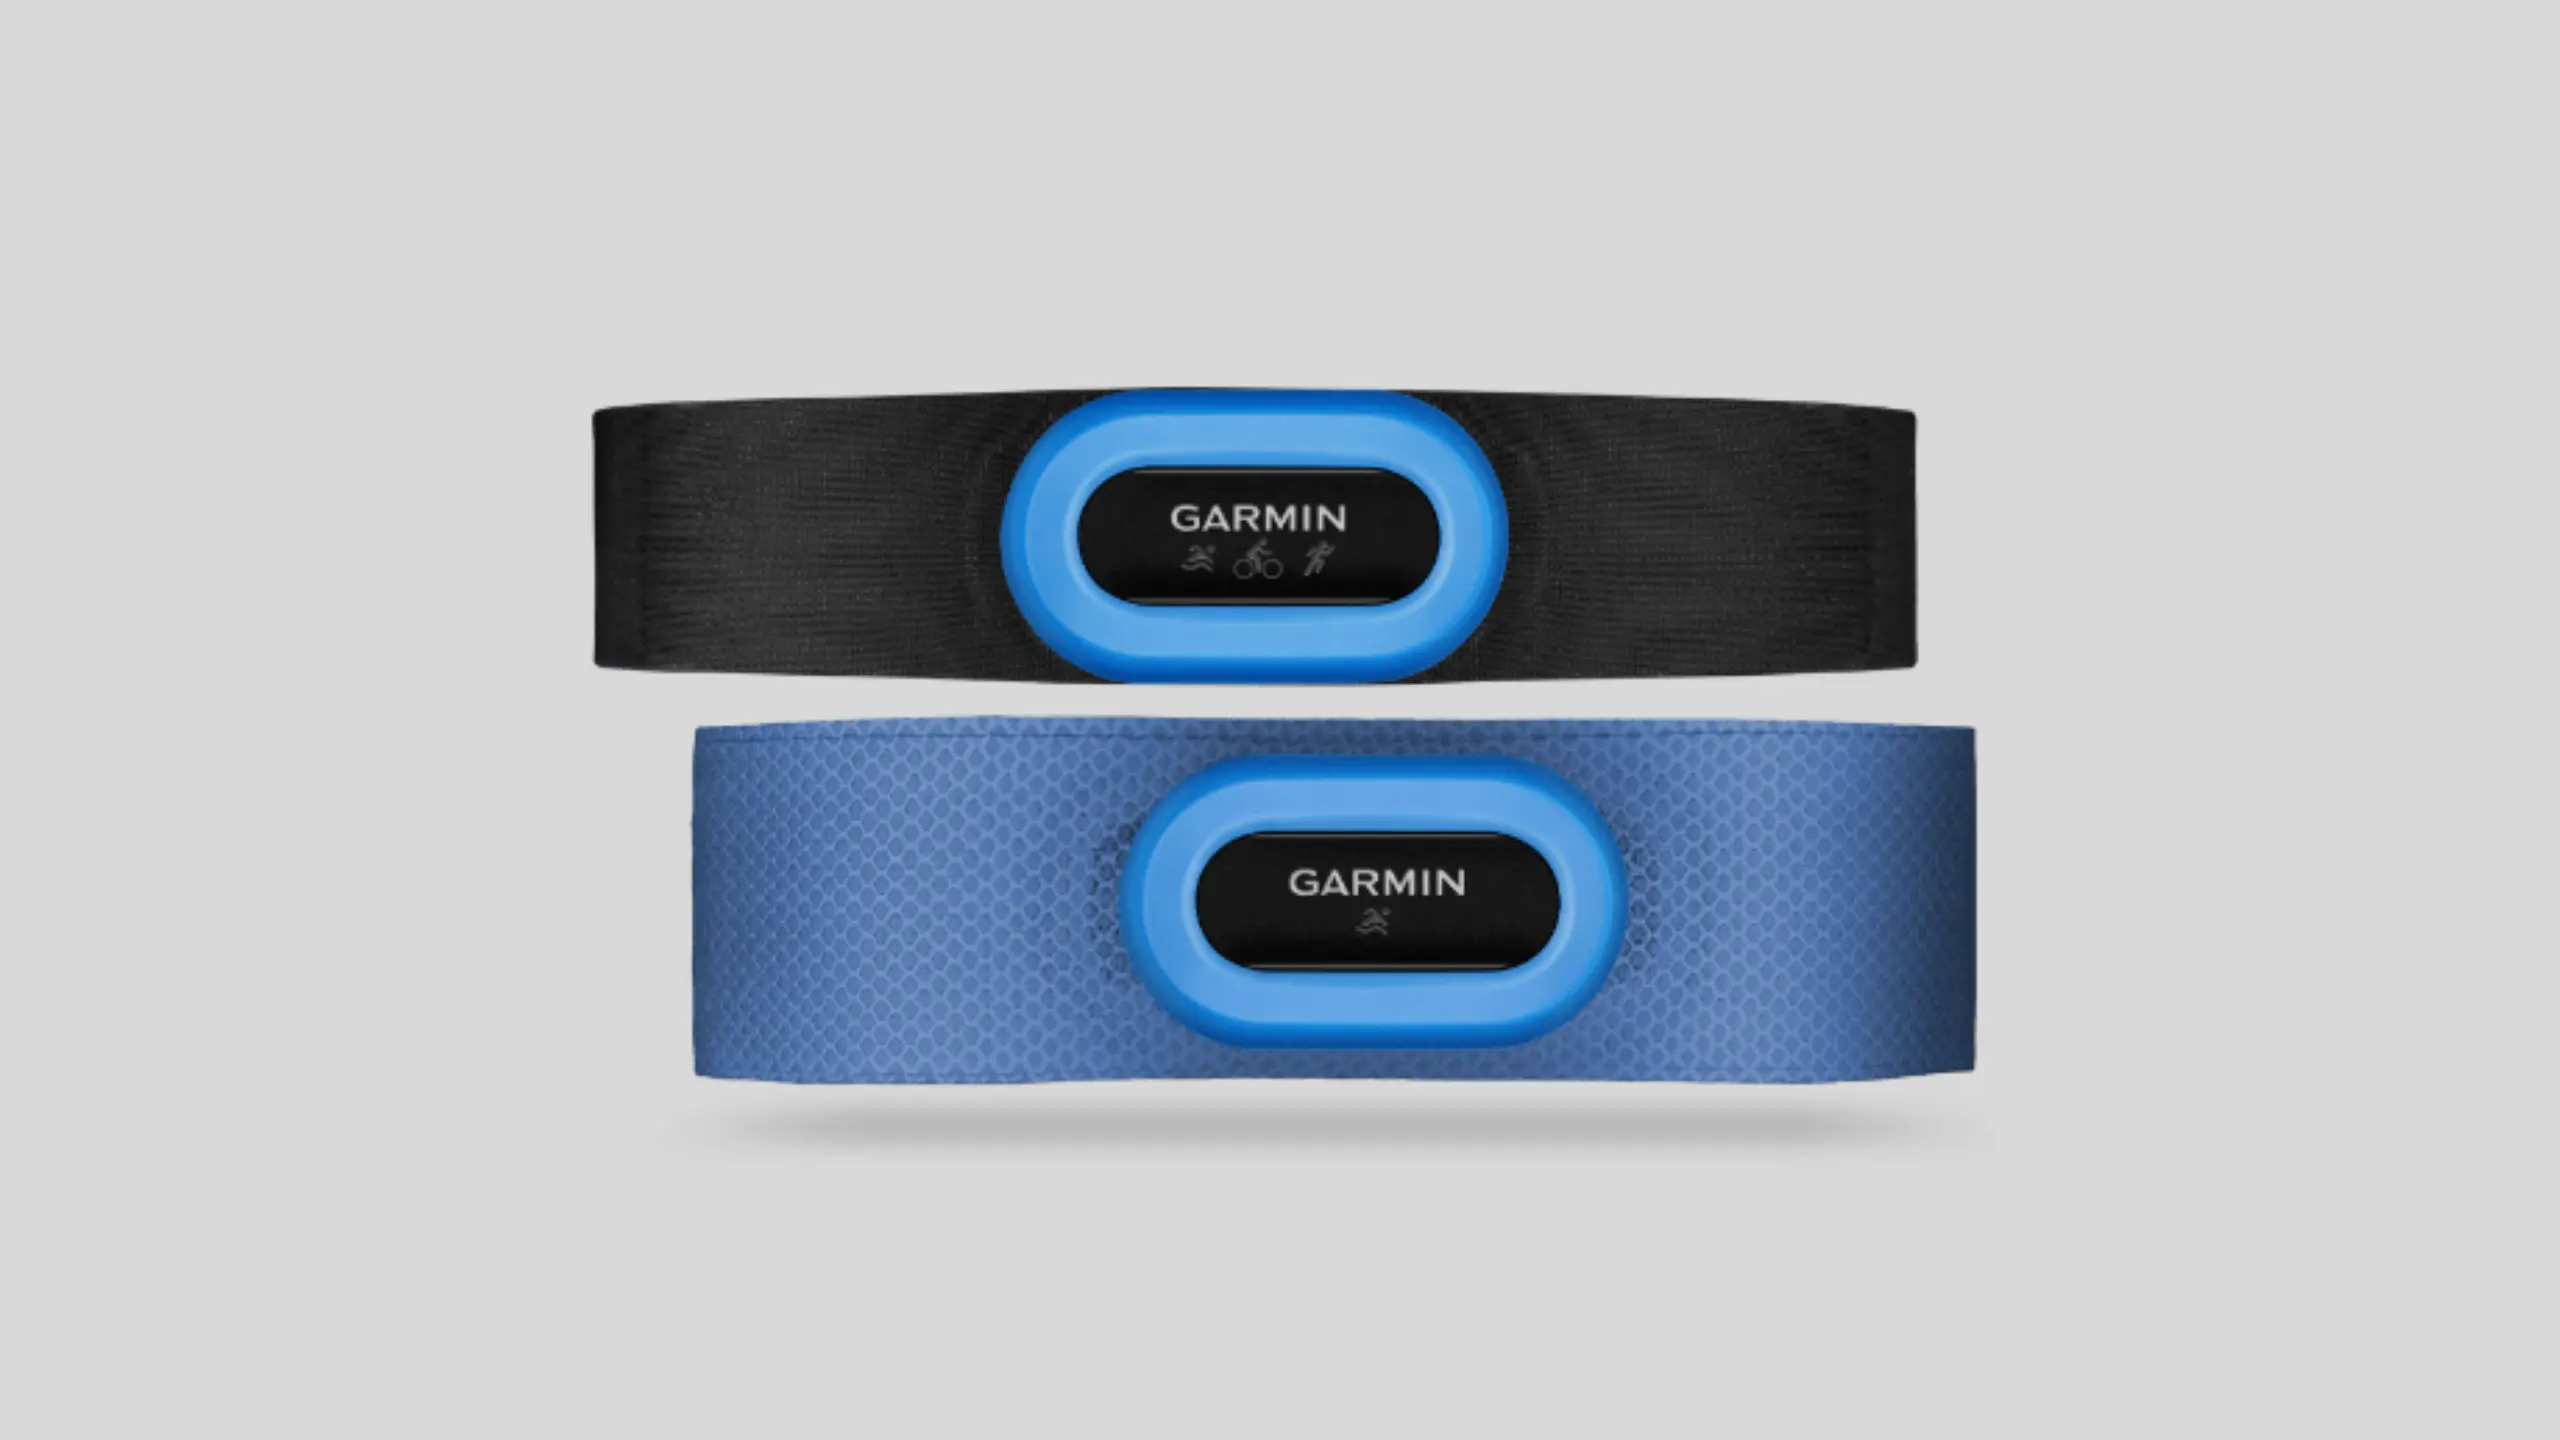 WHAT IS GARMIN HEART RATE MONITOR, AND HOW IT WORKS